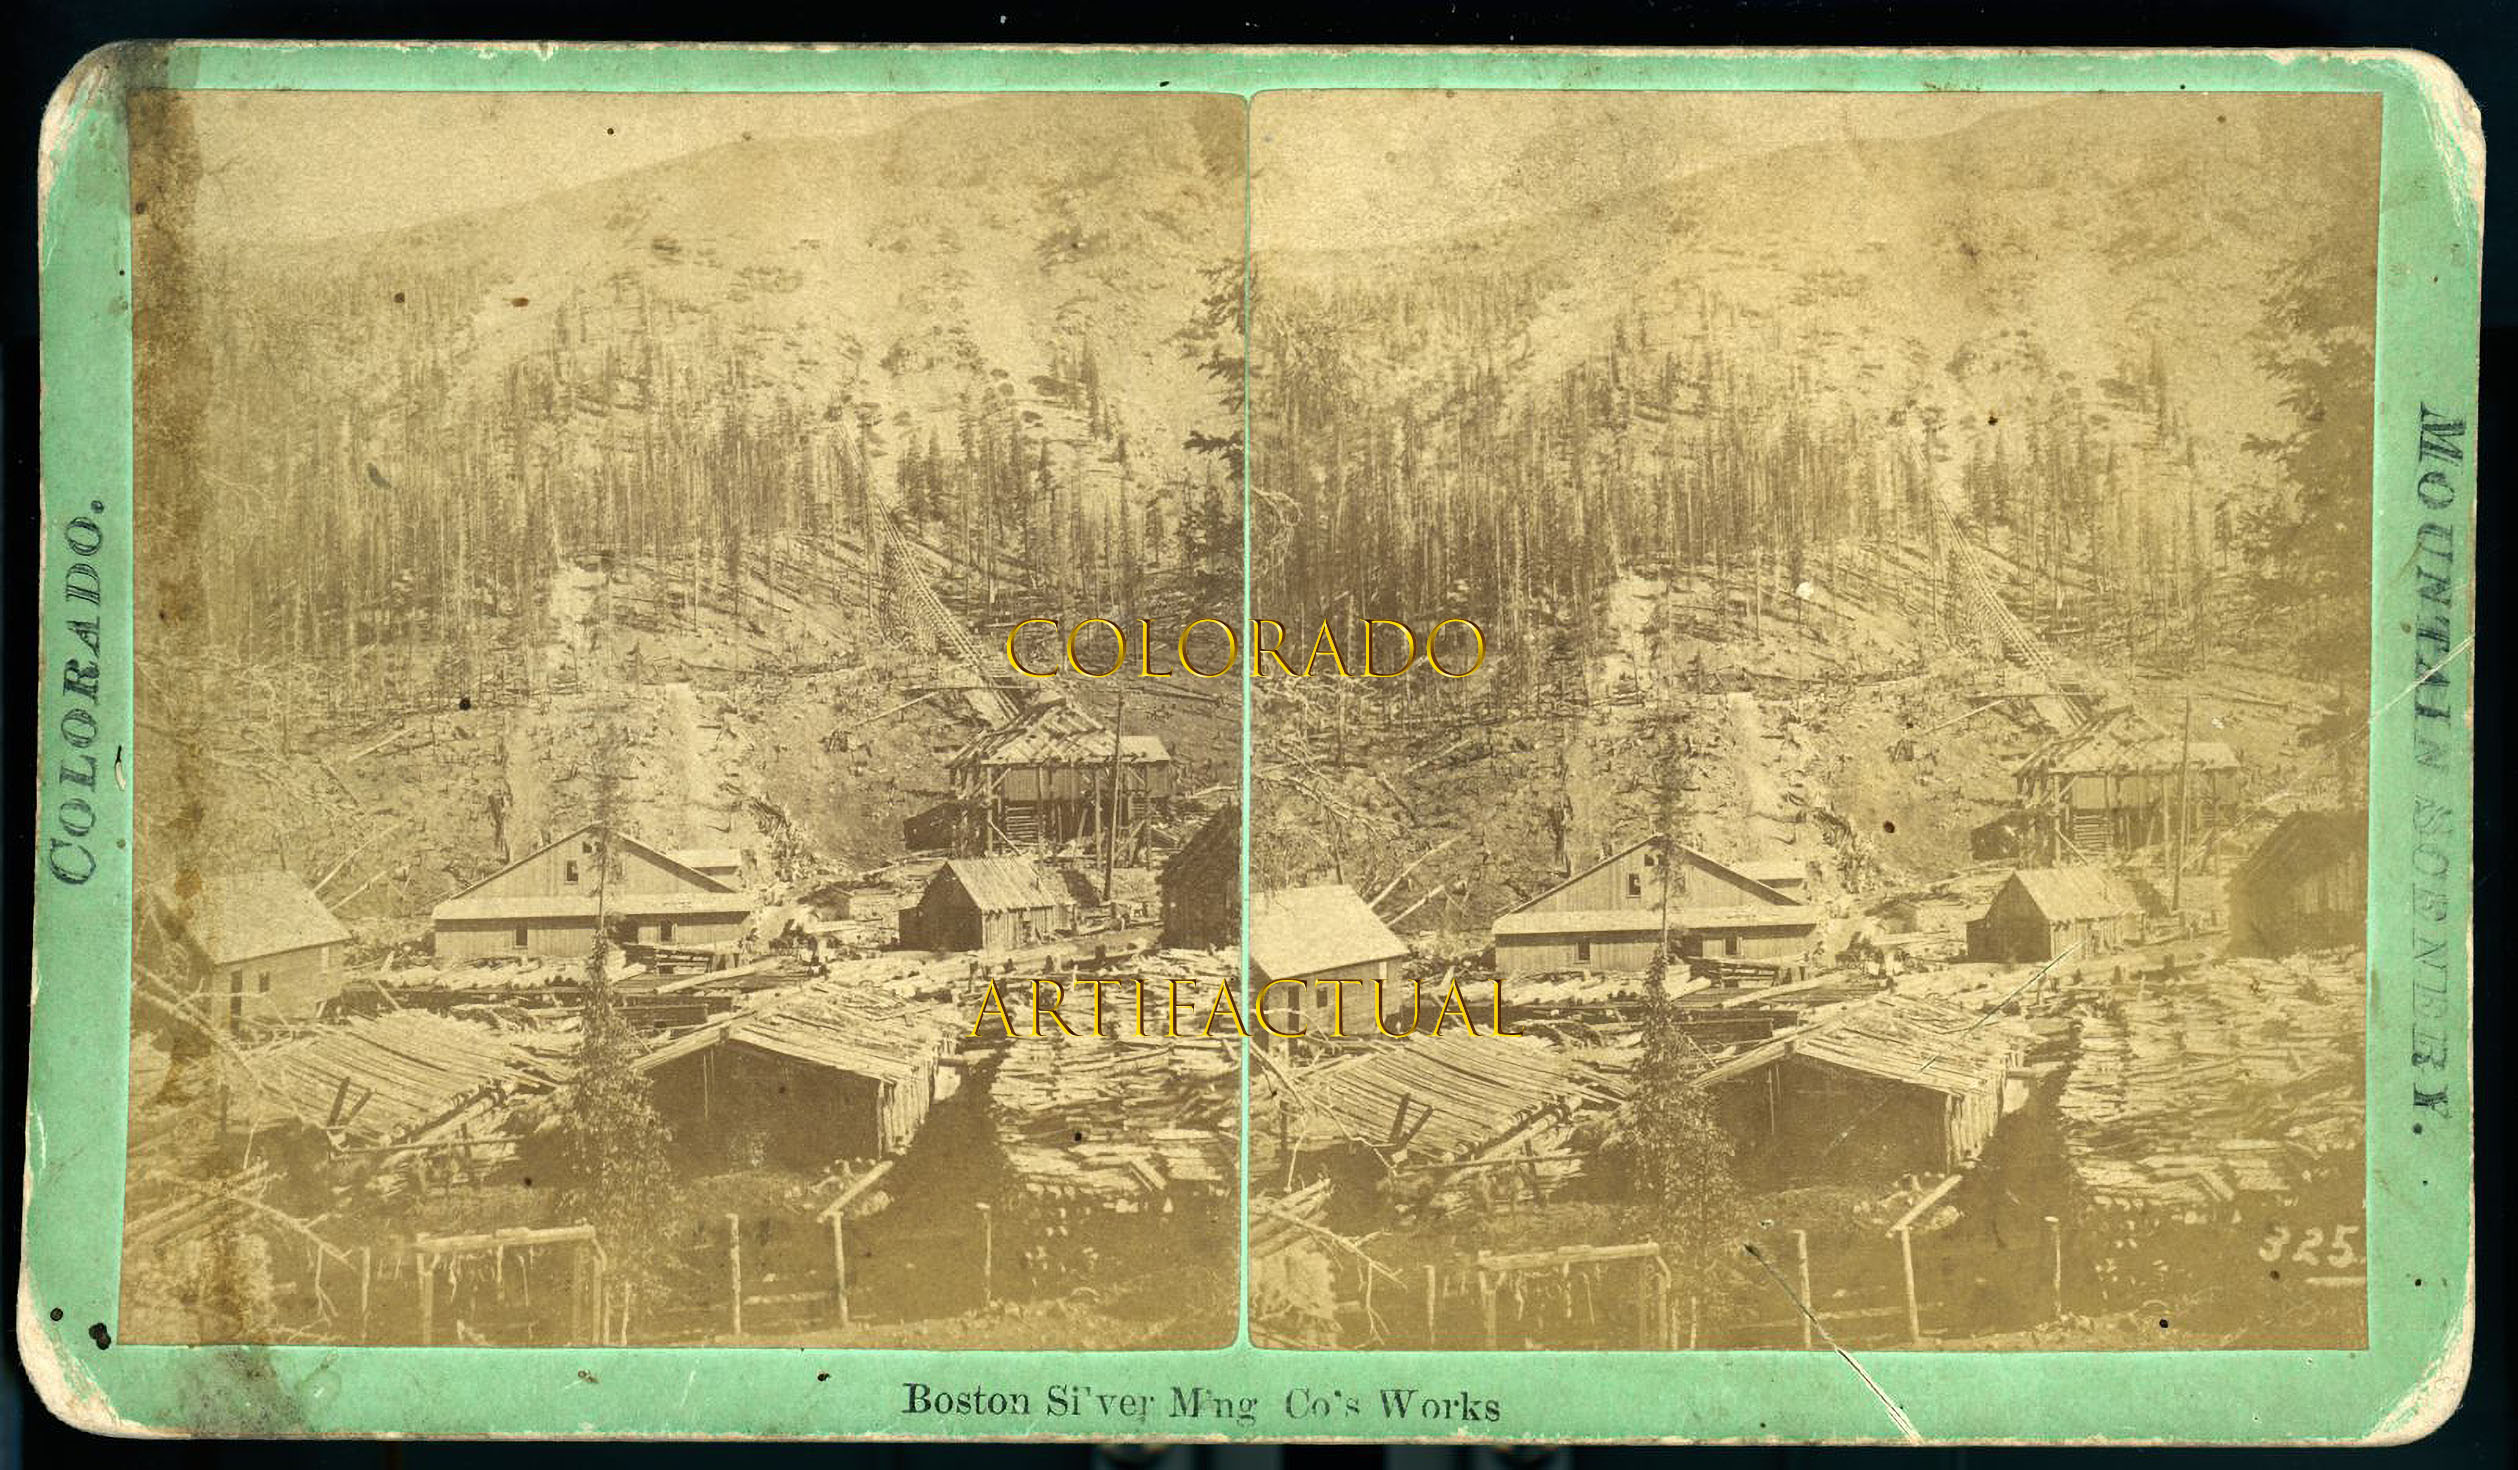 BOSTON SILVER MINING COMPANY WORKS near Georgetown Colorado Territory William Chamberlain stereo view photograph 1870